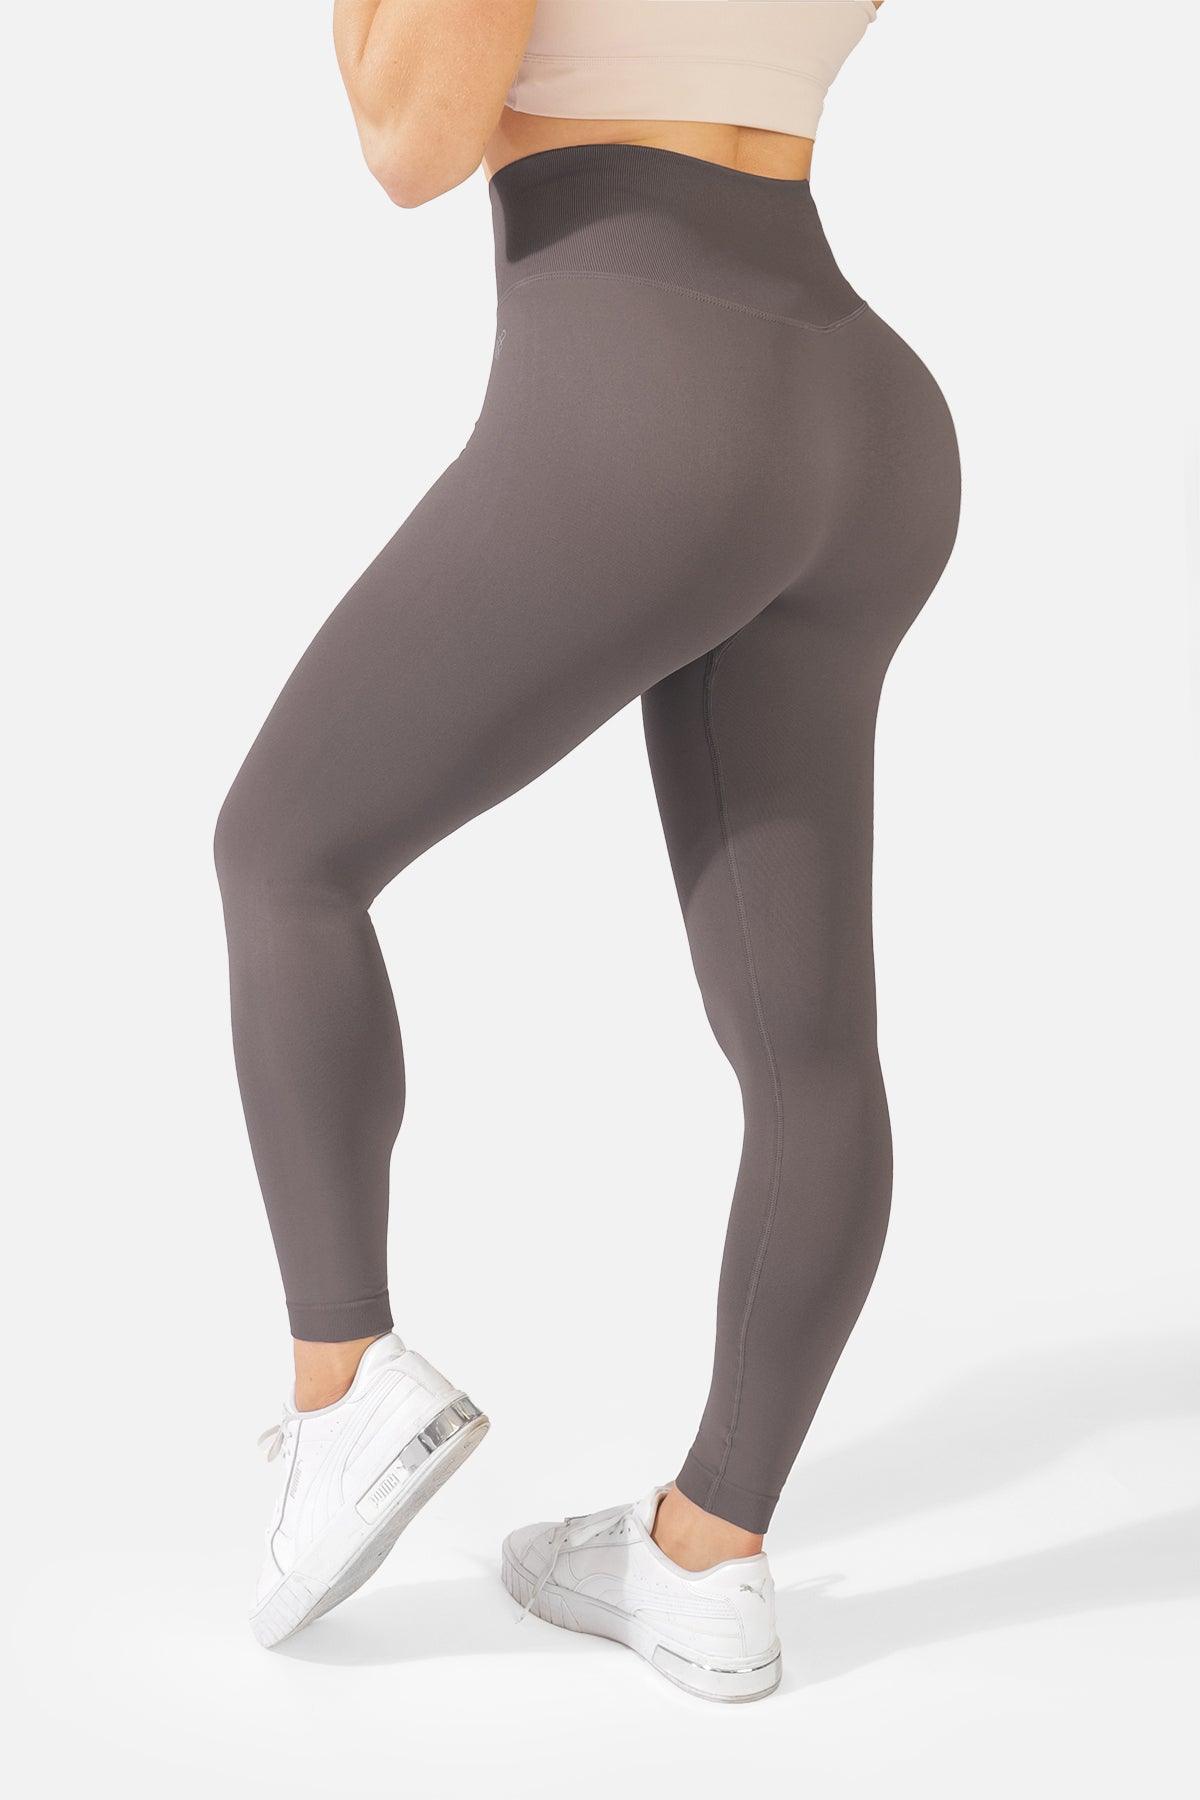 Gym Tights and Leggings, Pockets, Seamless